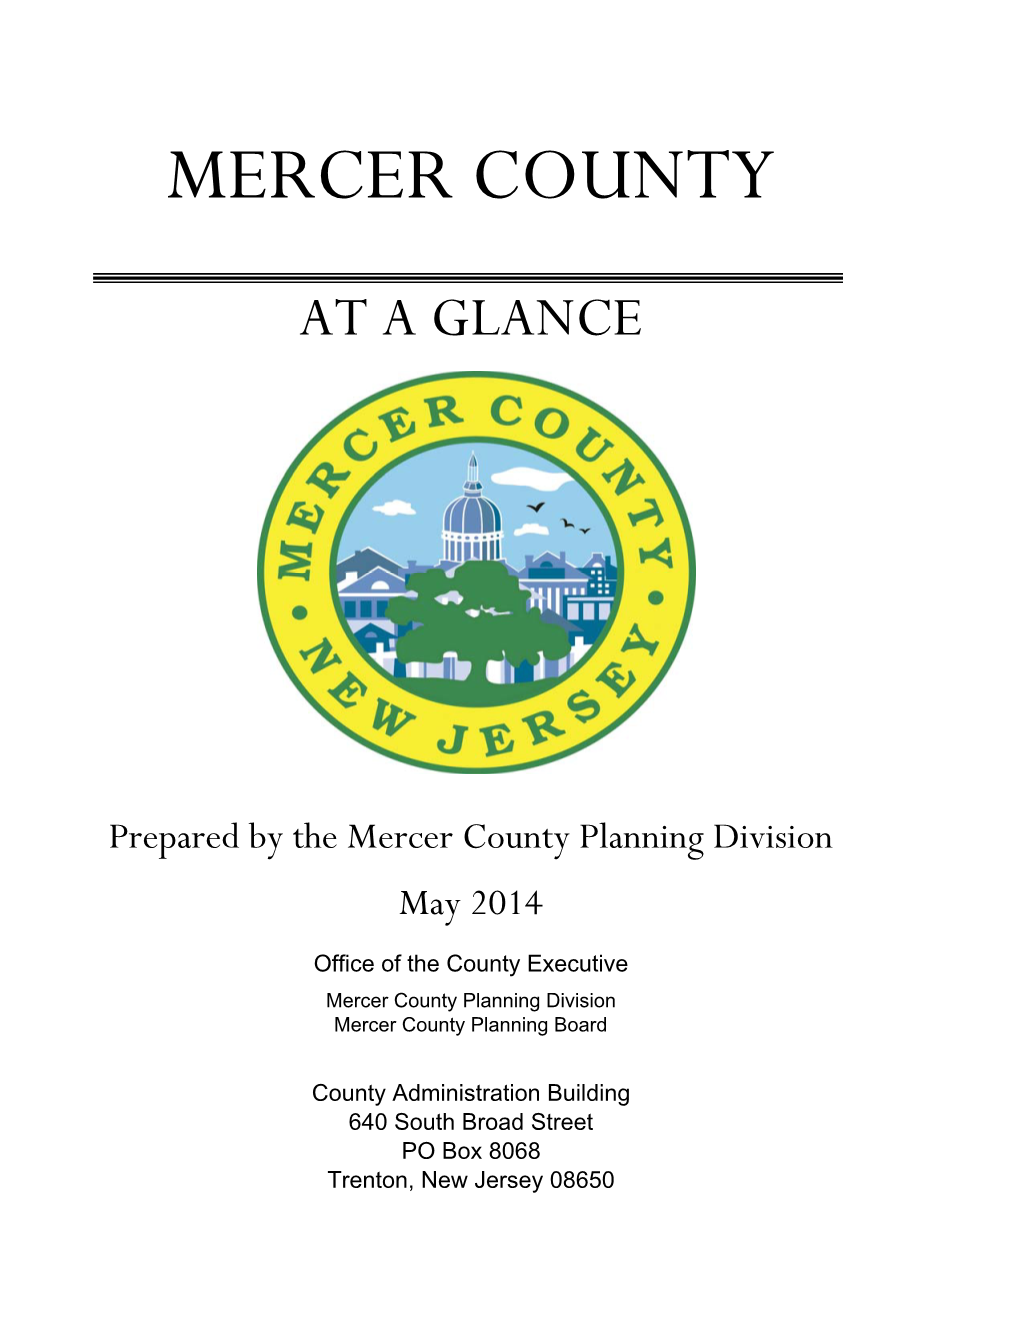 Mercer County at a Glance